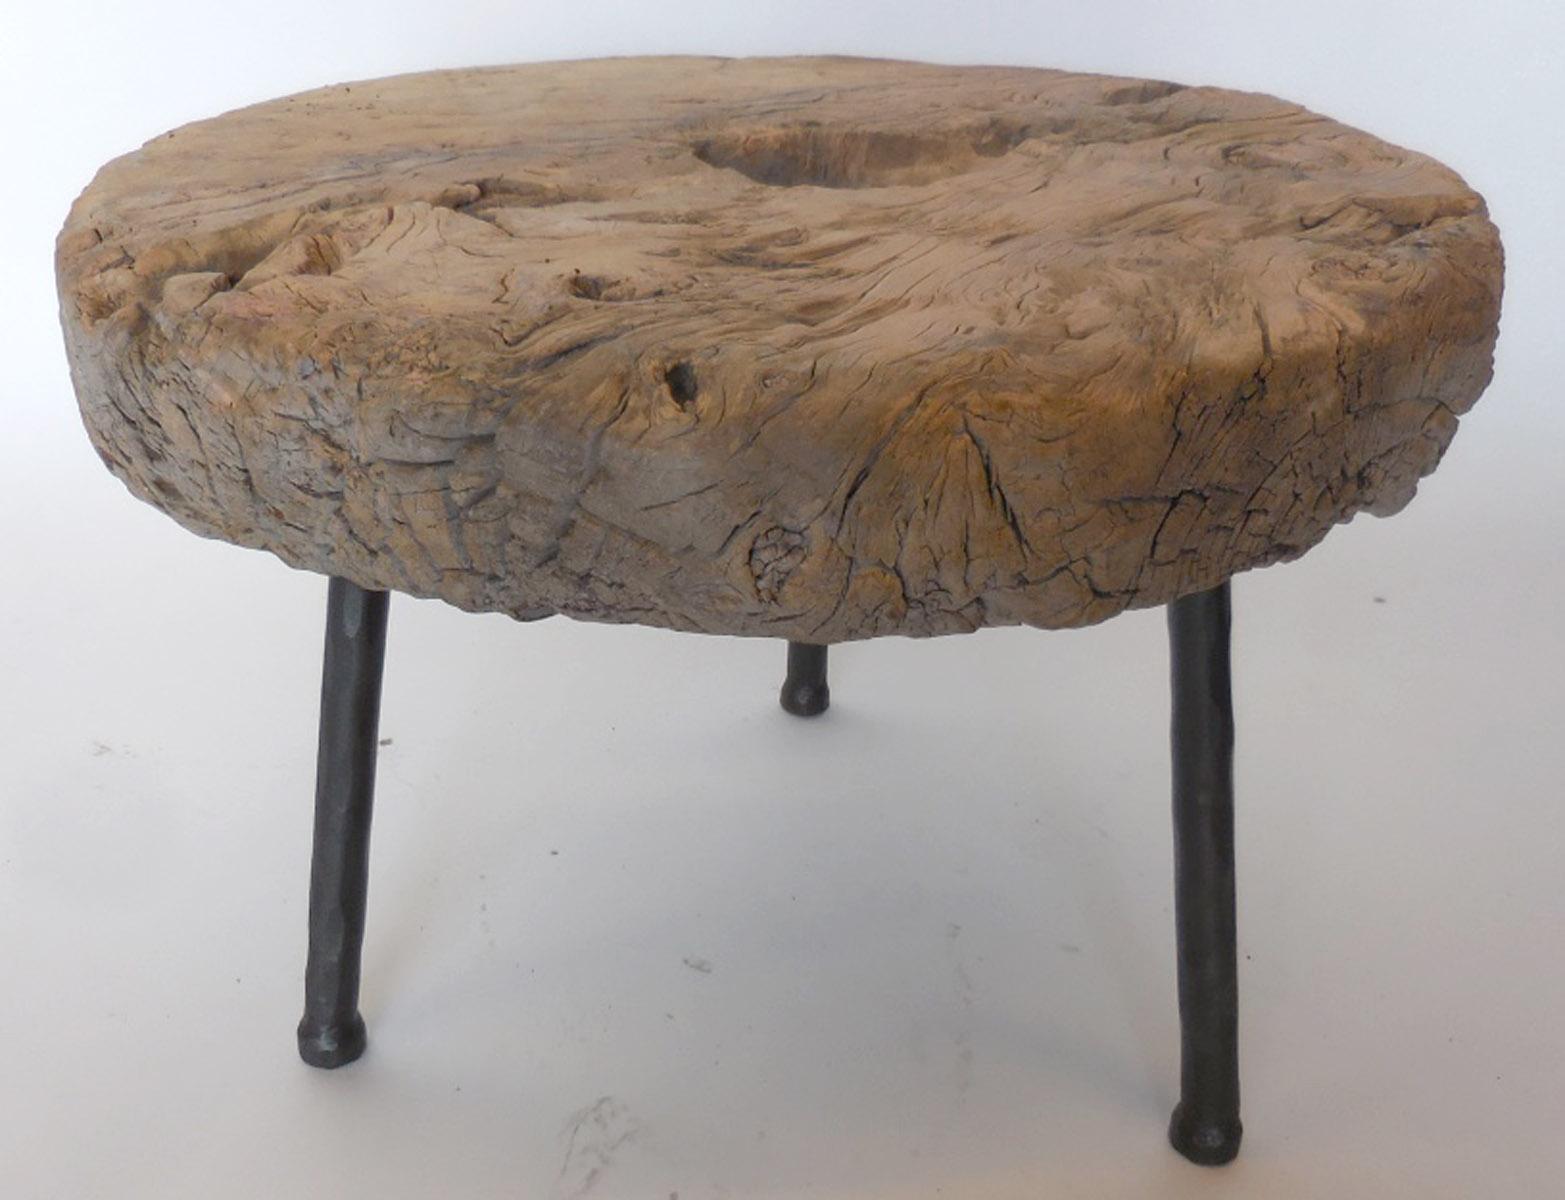 Rustic 19th century wooden elm wheel atop three contemporary hand forged iron legs. Wood shows natural patina and appropriate wear. Flat on top. Sturdy. By Dos Gallos Studio. 